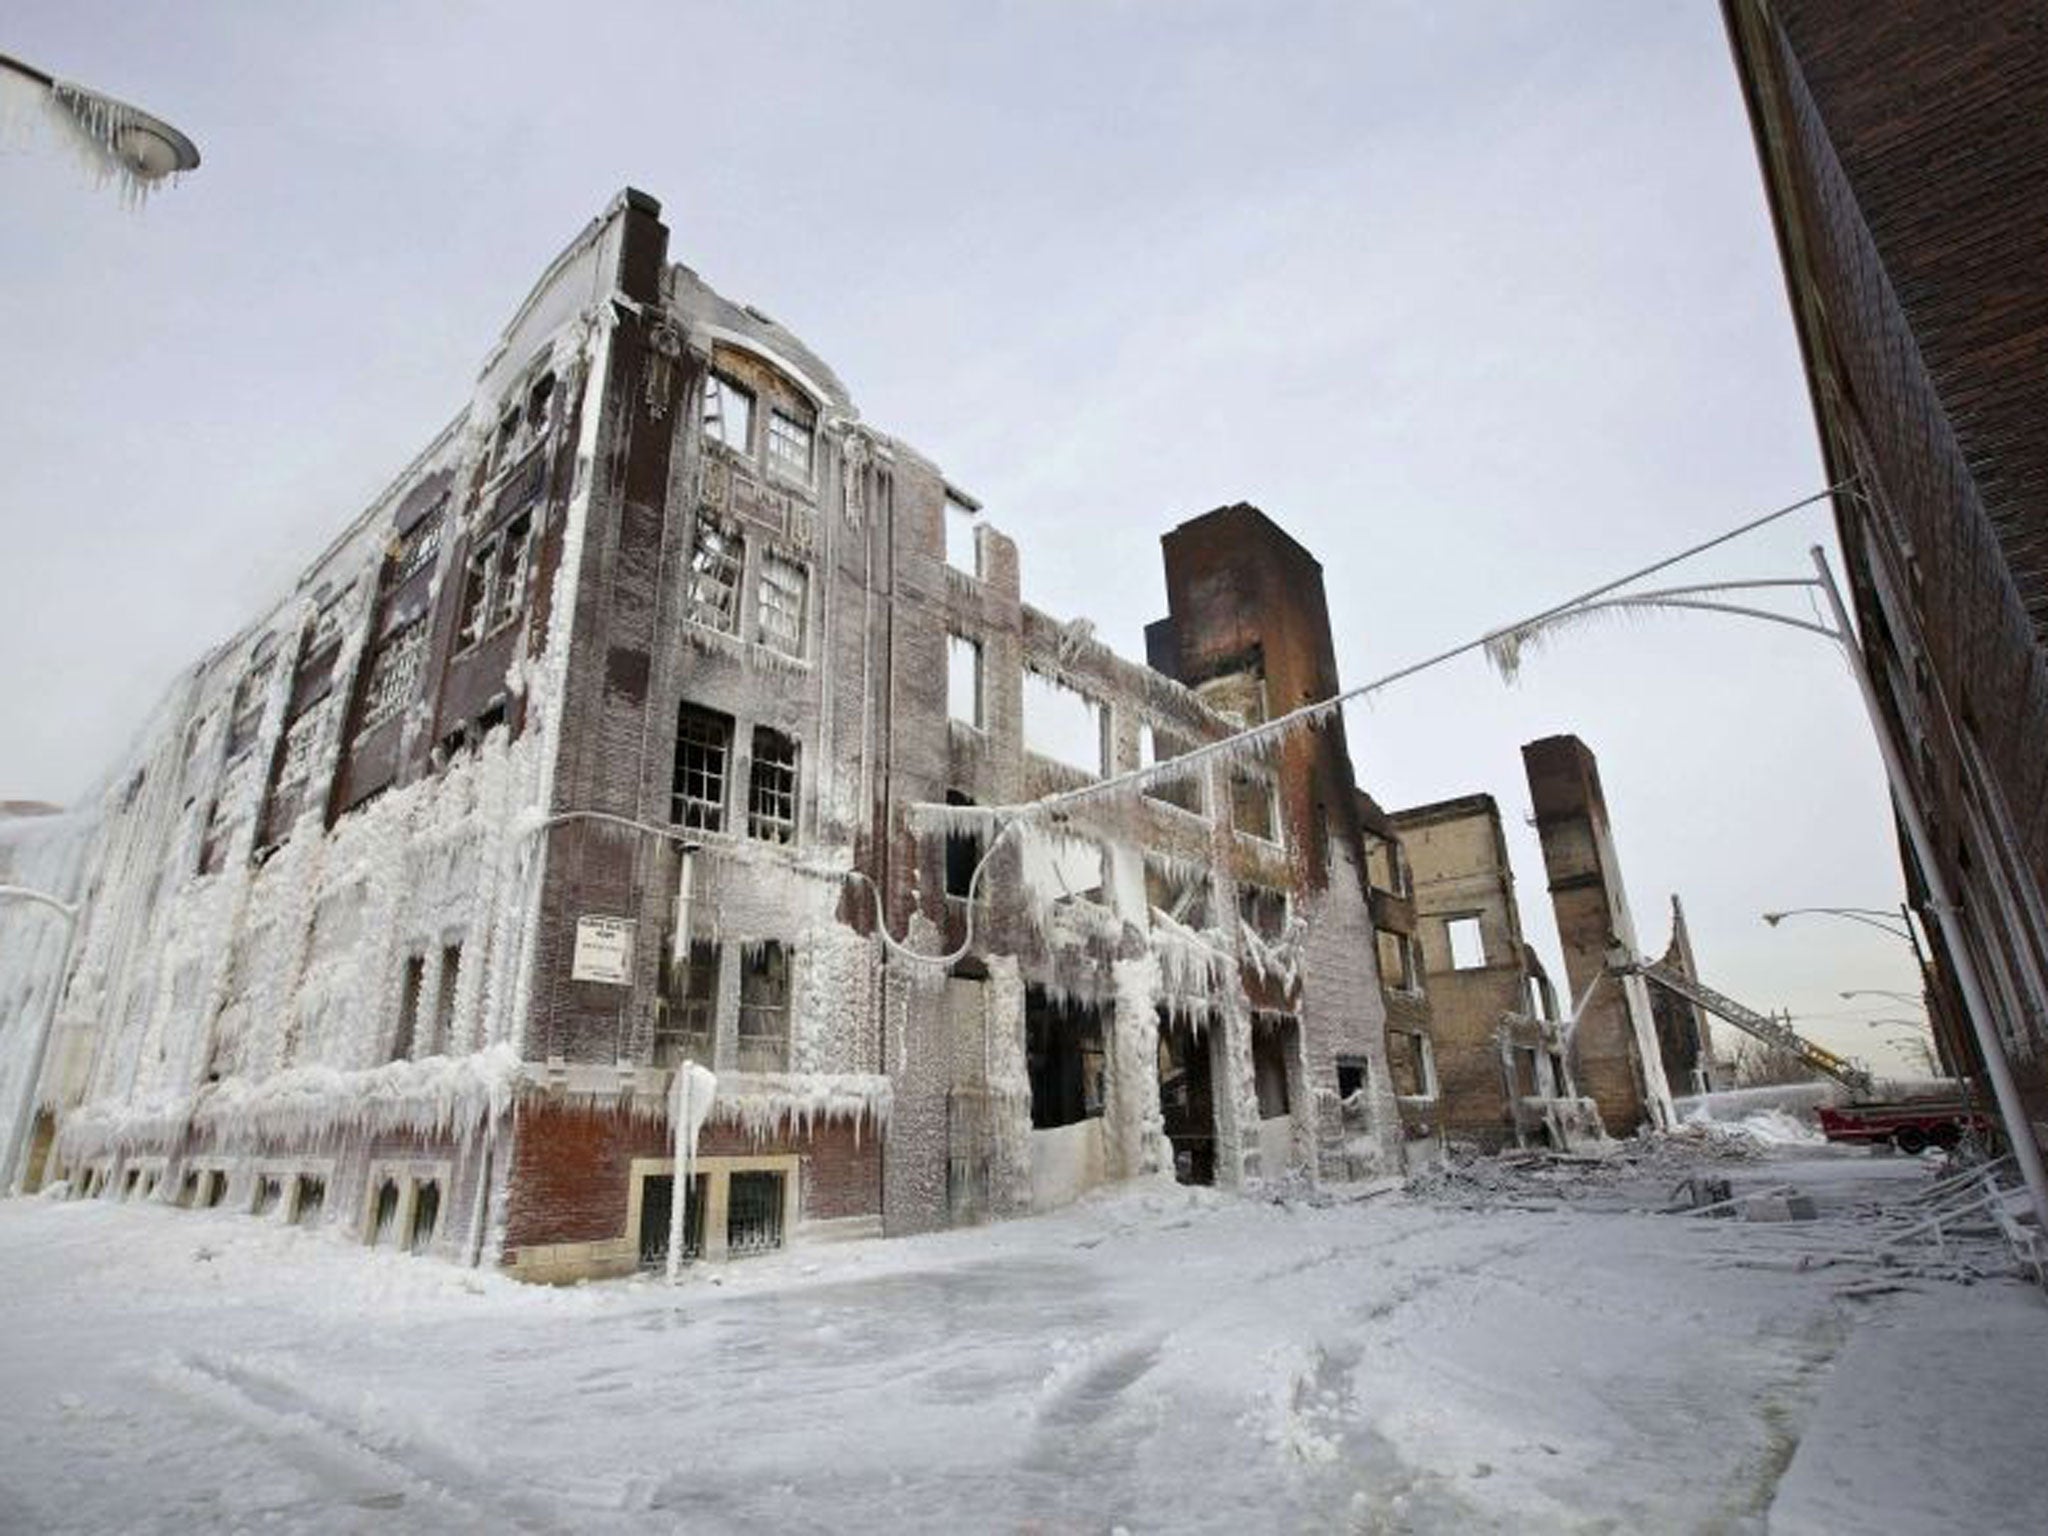 The ruins of a warehouse, still on fire, which started burning on Tuesday night are seen in Chicago January 24, 2013